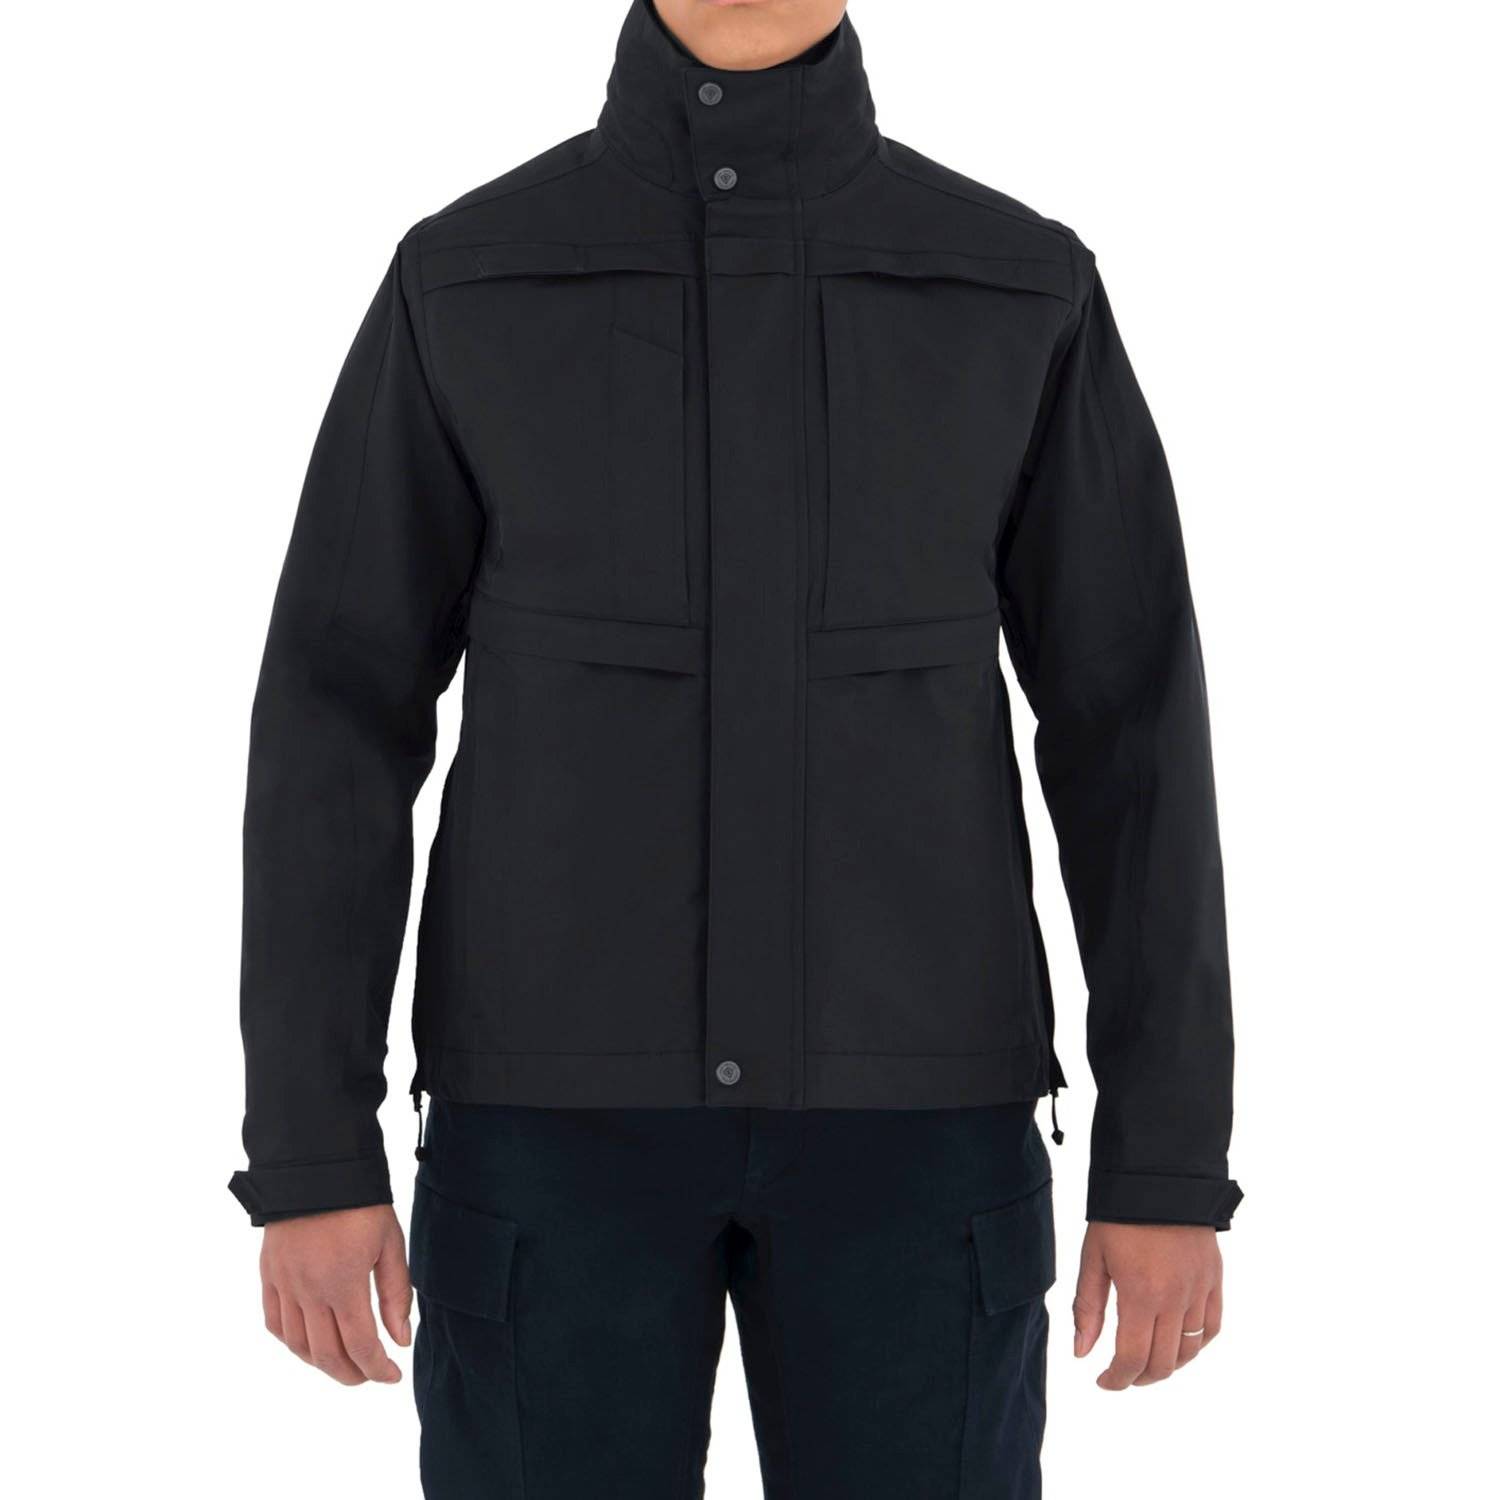 FIRST TACTICAL WOMEN'S TACTIX SYSTEM JACKET